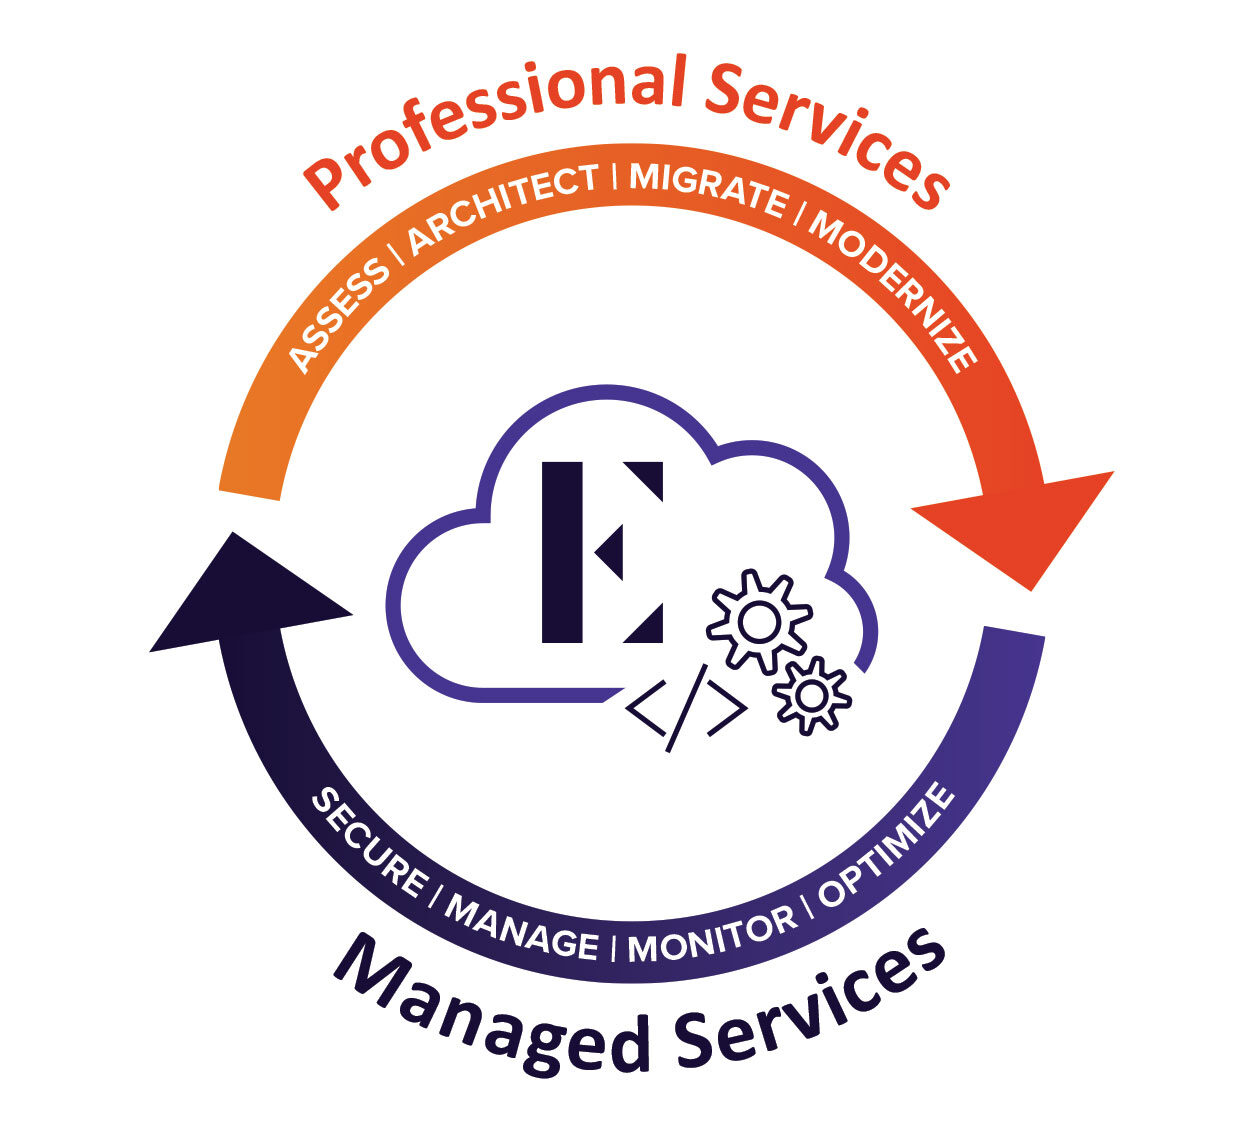 illustration depicting cycle of professional and managed services